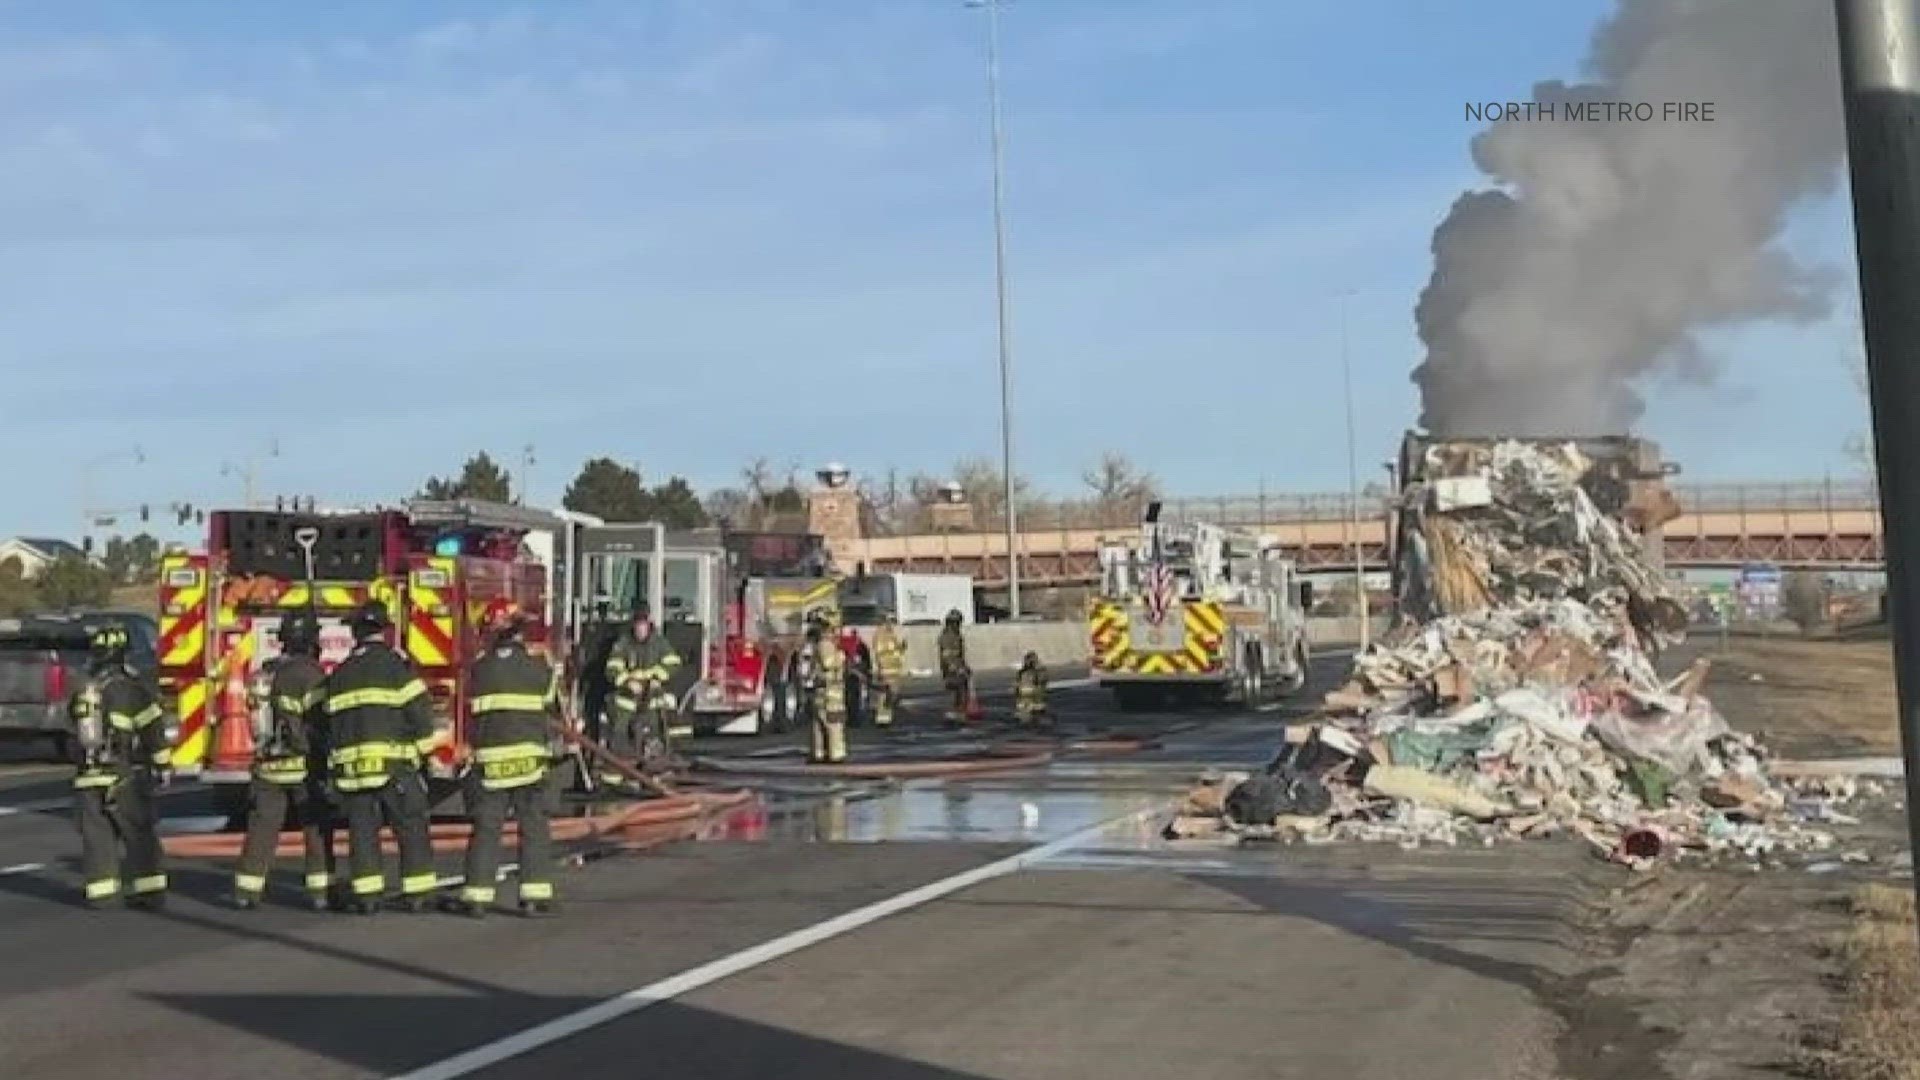 Several lanes of Interstate 25 were closed Monday morning while fire crews worked to put out a vehicle fire.